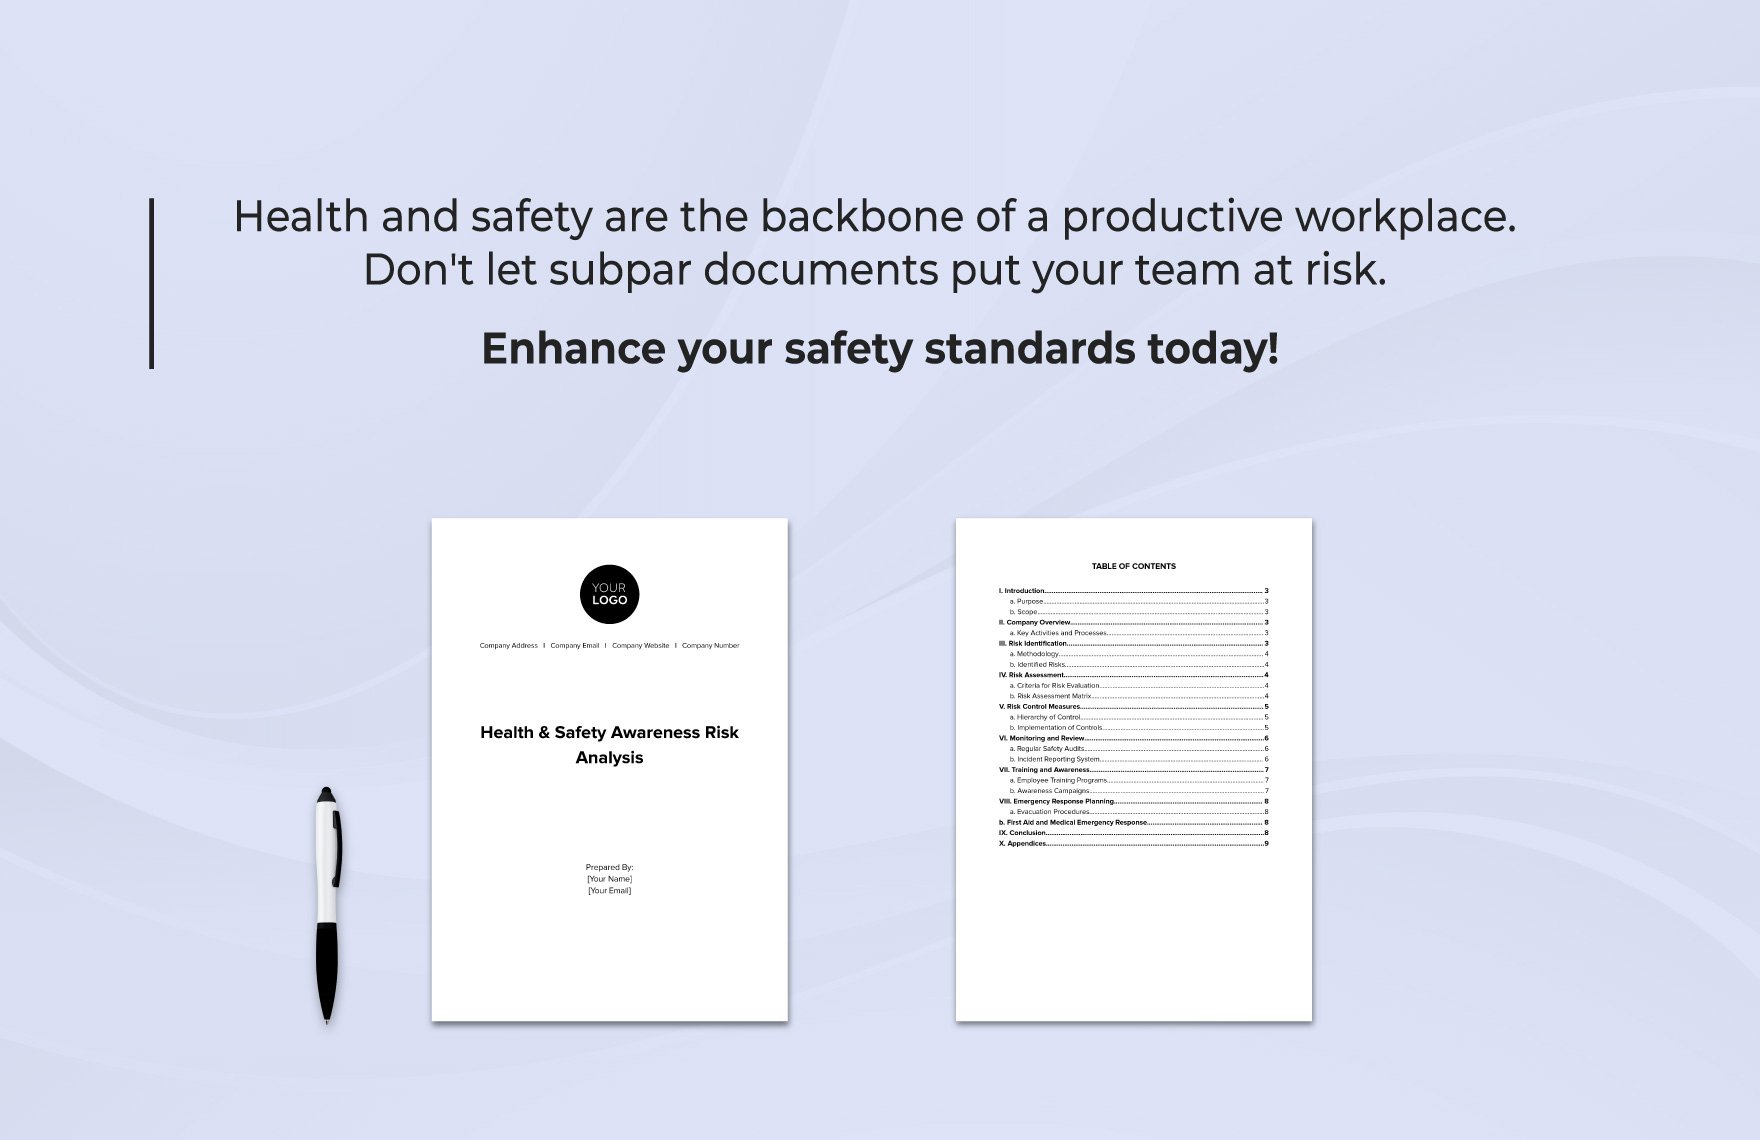 Health & Safety Awareness Risk Analysis Template